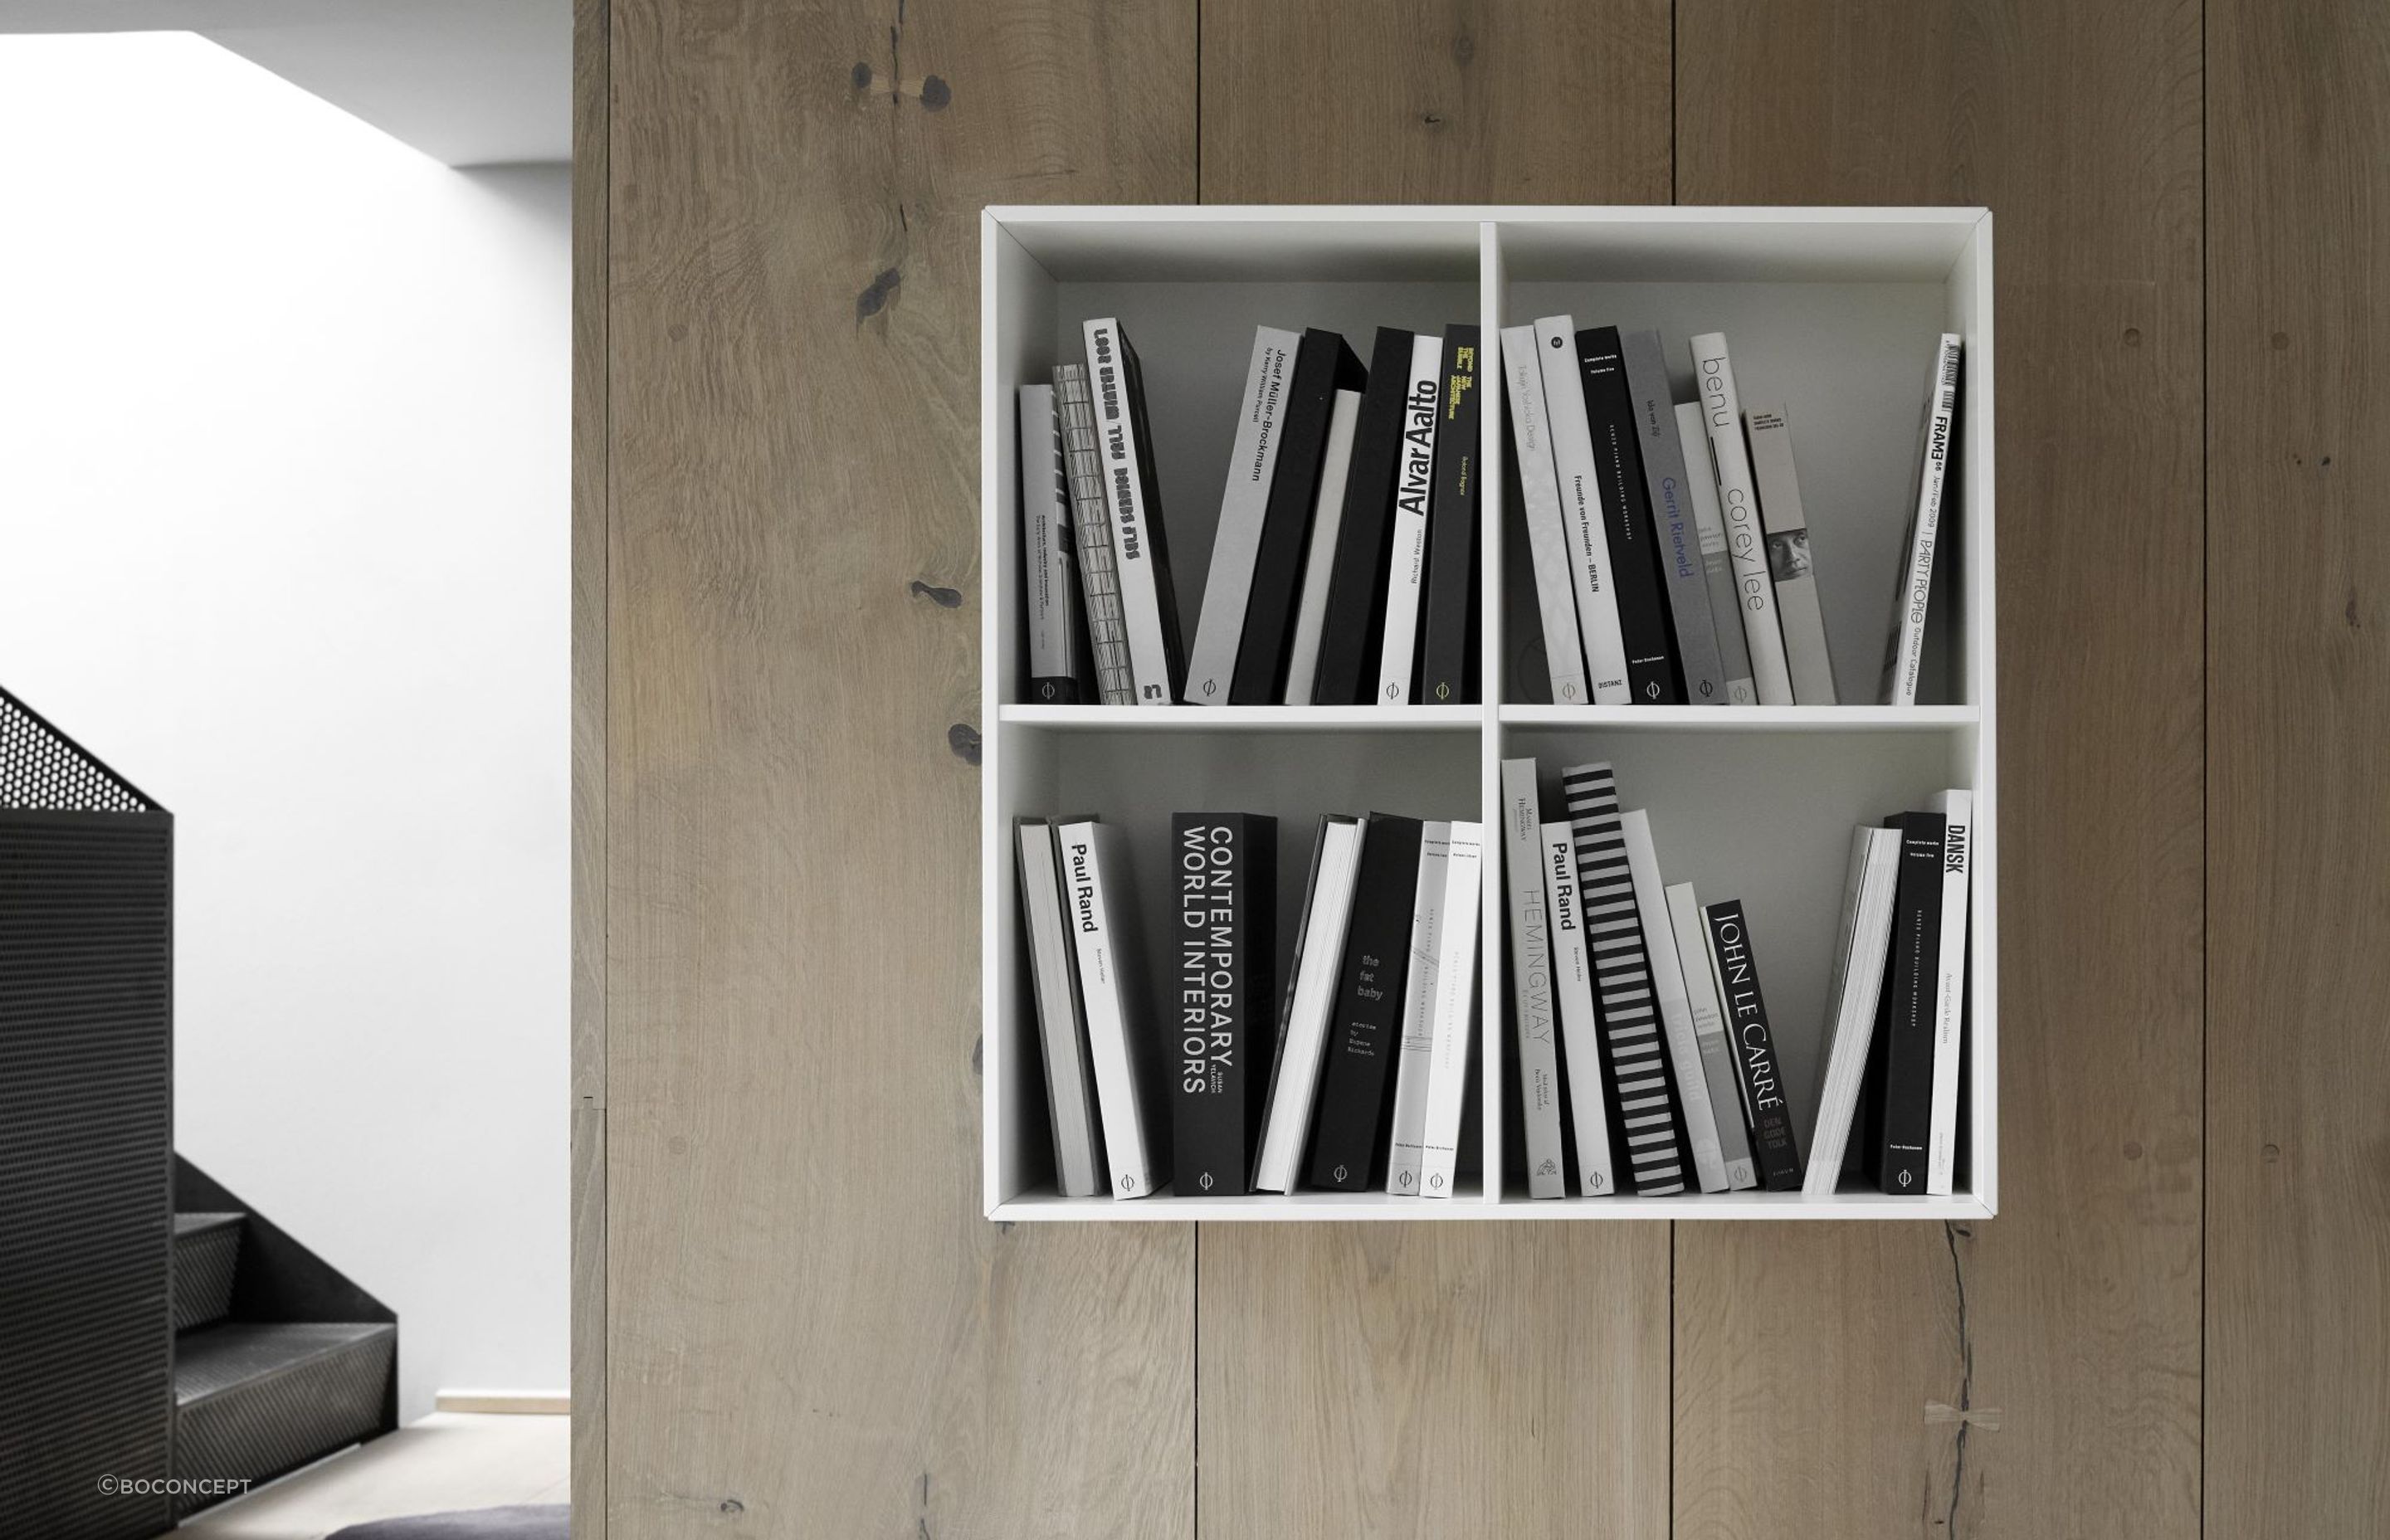 A monochrome approach to colour coordination with the sleek Como 5430 Bookcase, an innovative floating bookshelf system.